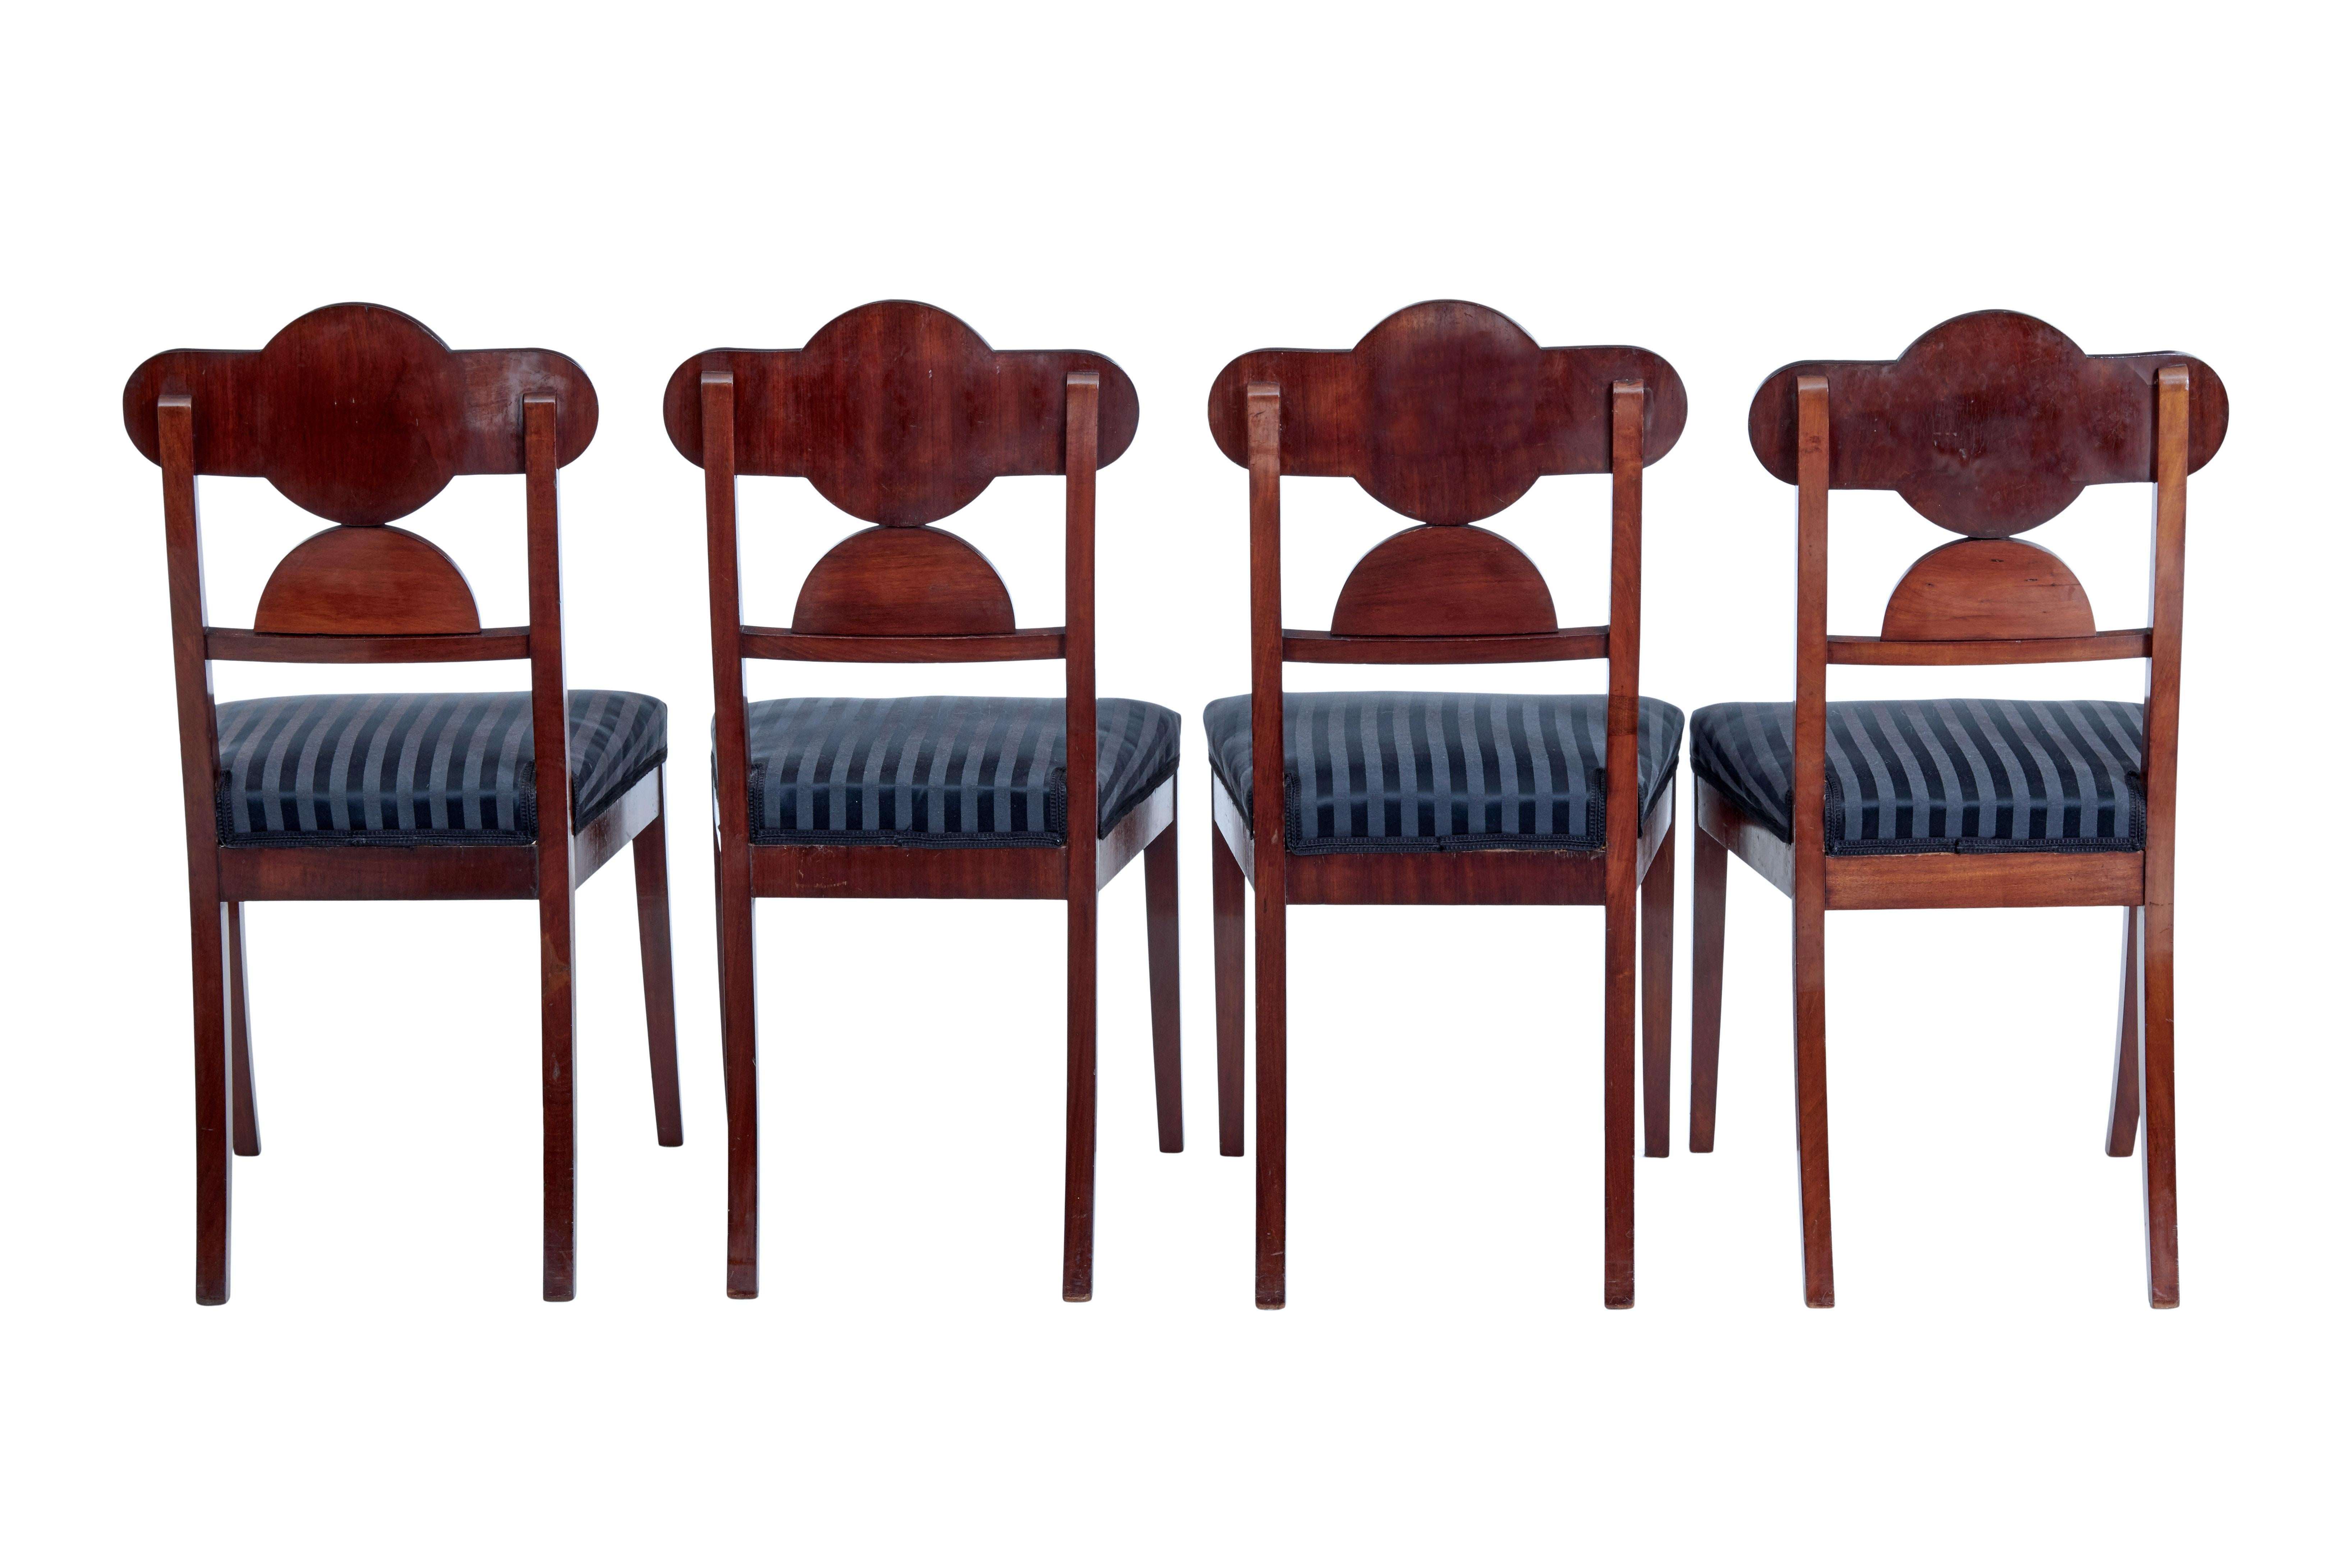 Hand-Crafted Set of 4 Early 19th Swedish Mahogany Empire Dining Chairs